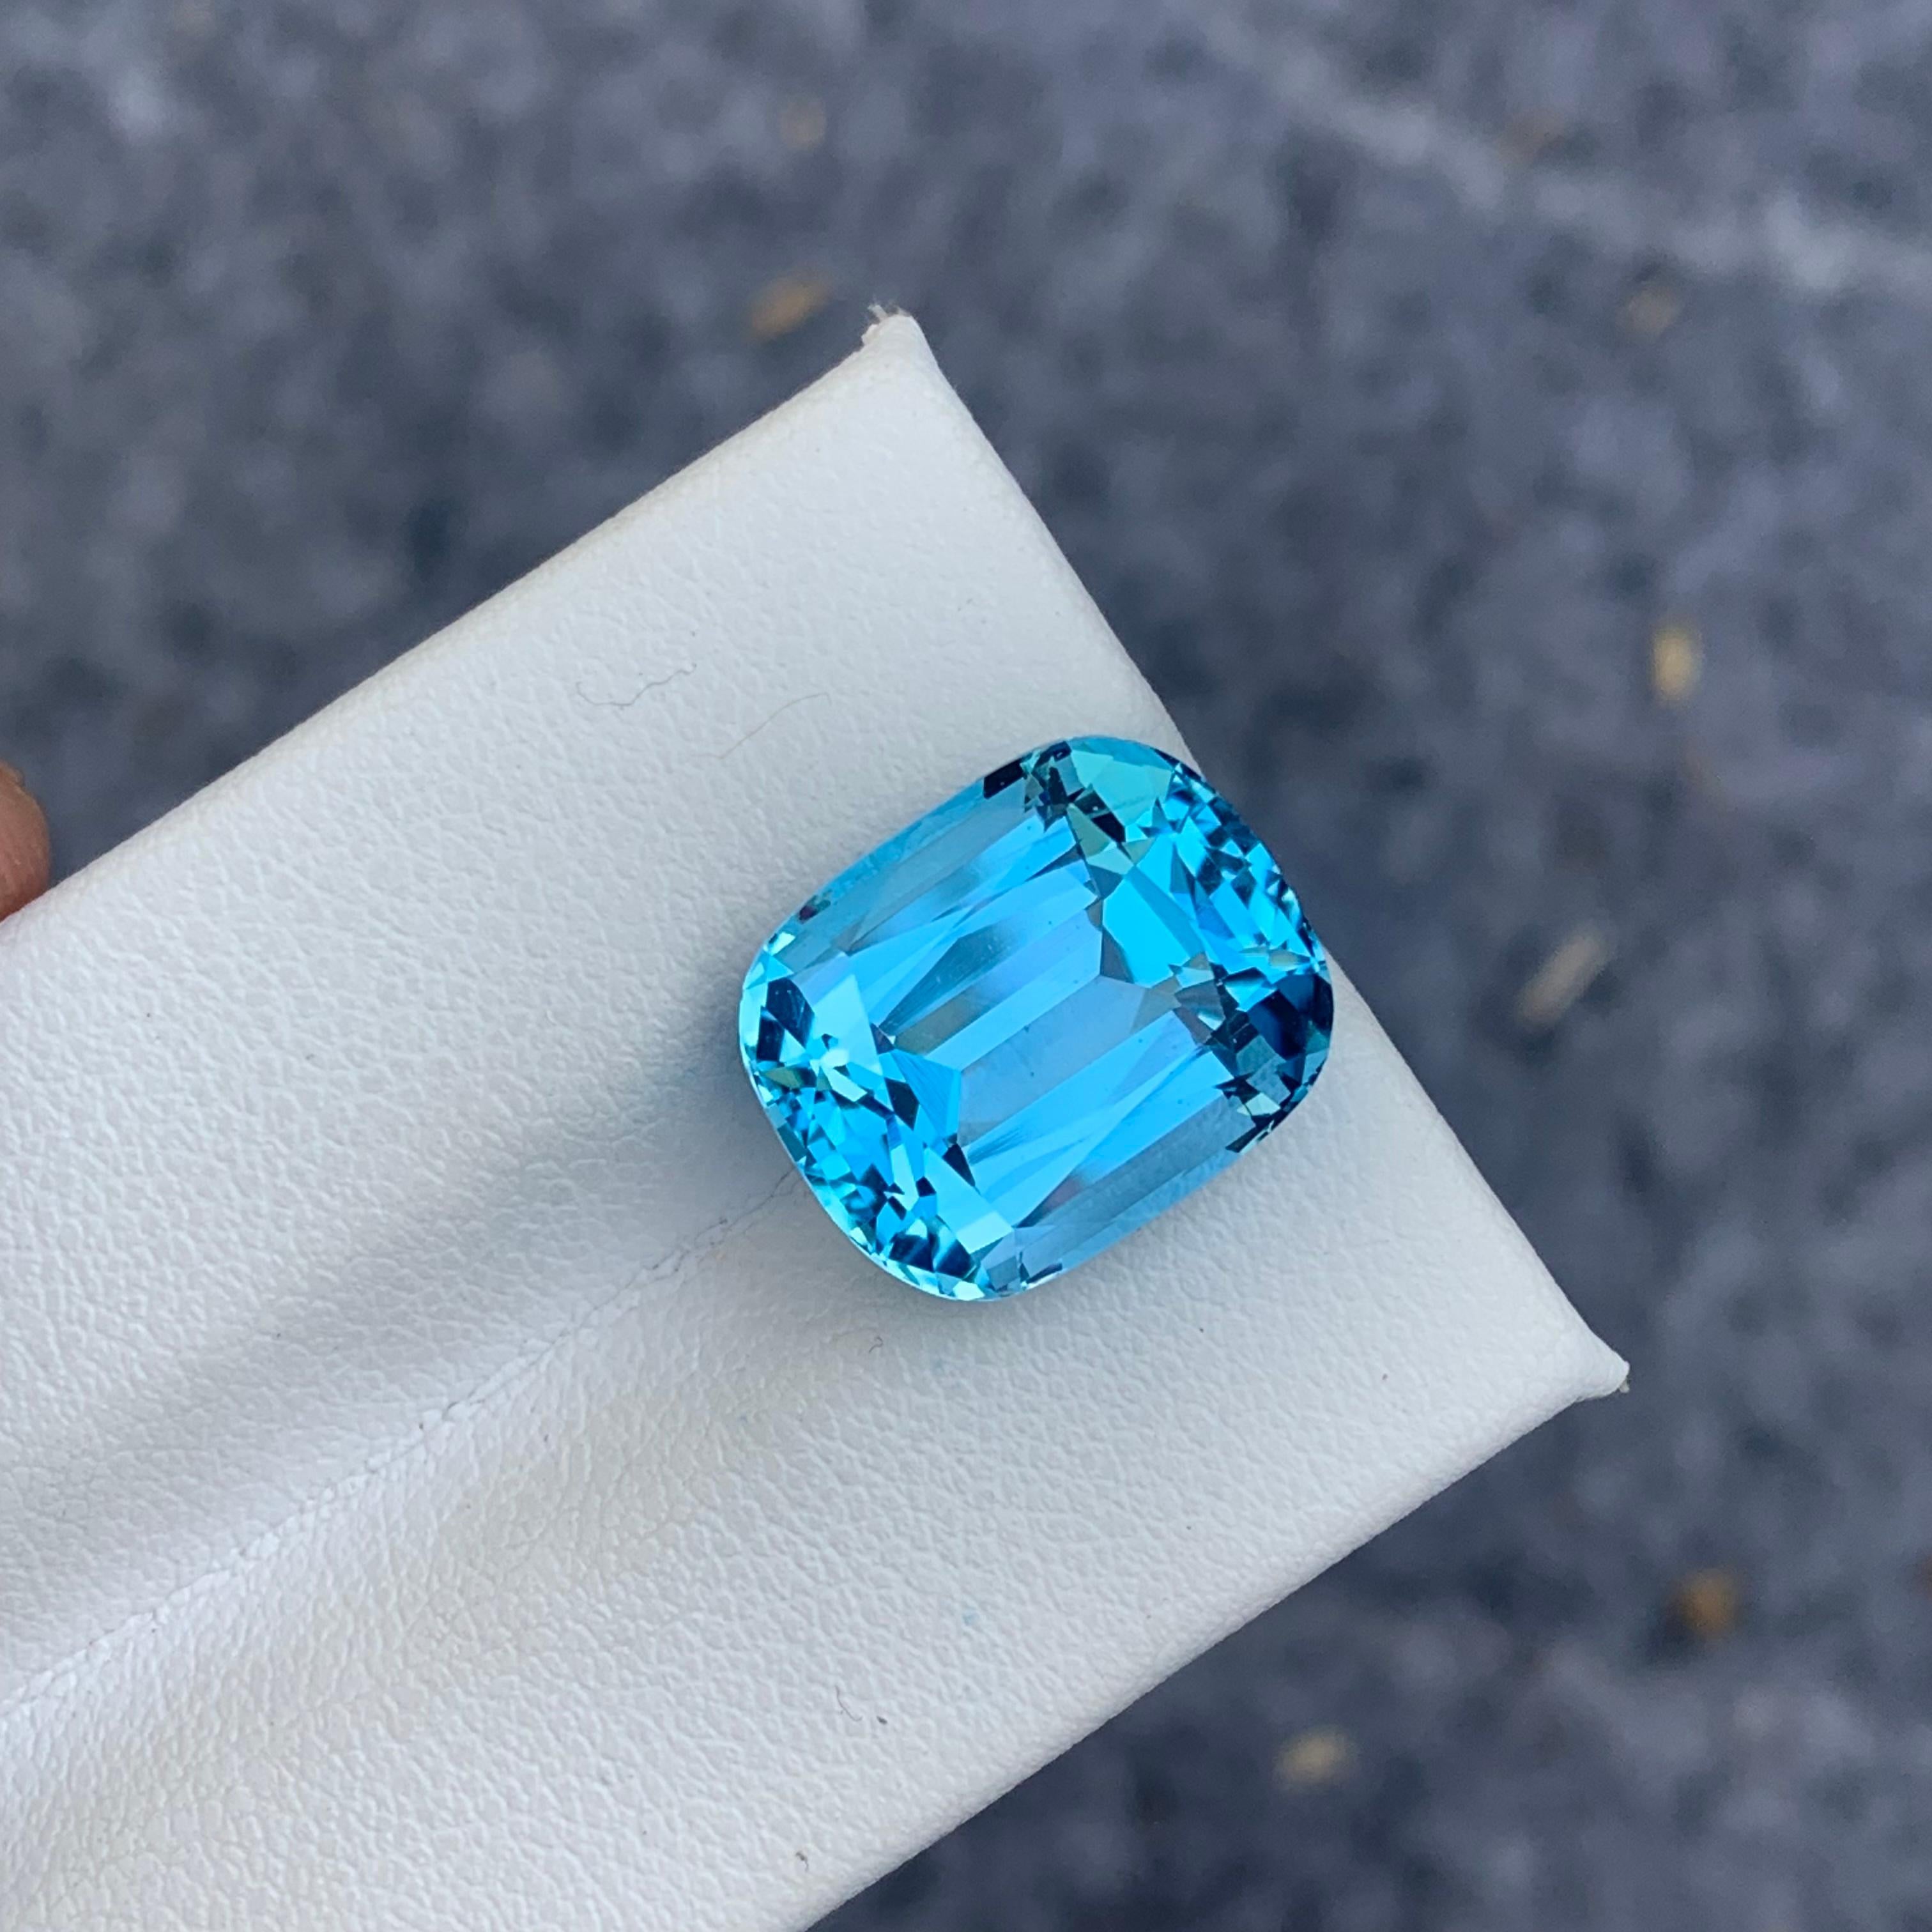 Elegant 13.35 Carat Loose Sky Blue Topaz from Brazil with Cushion Facet For Sale 1